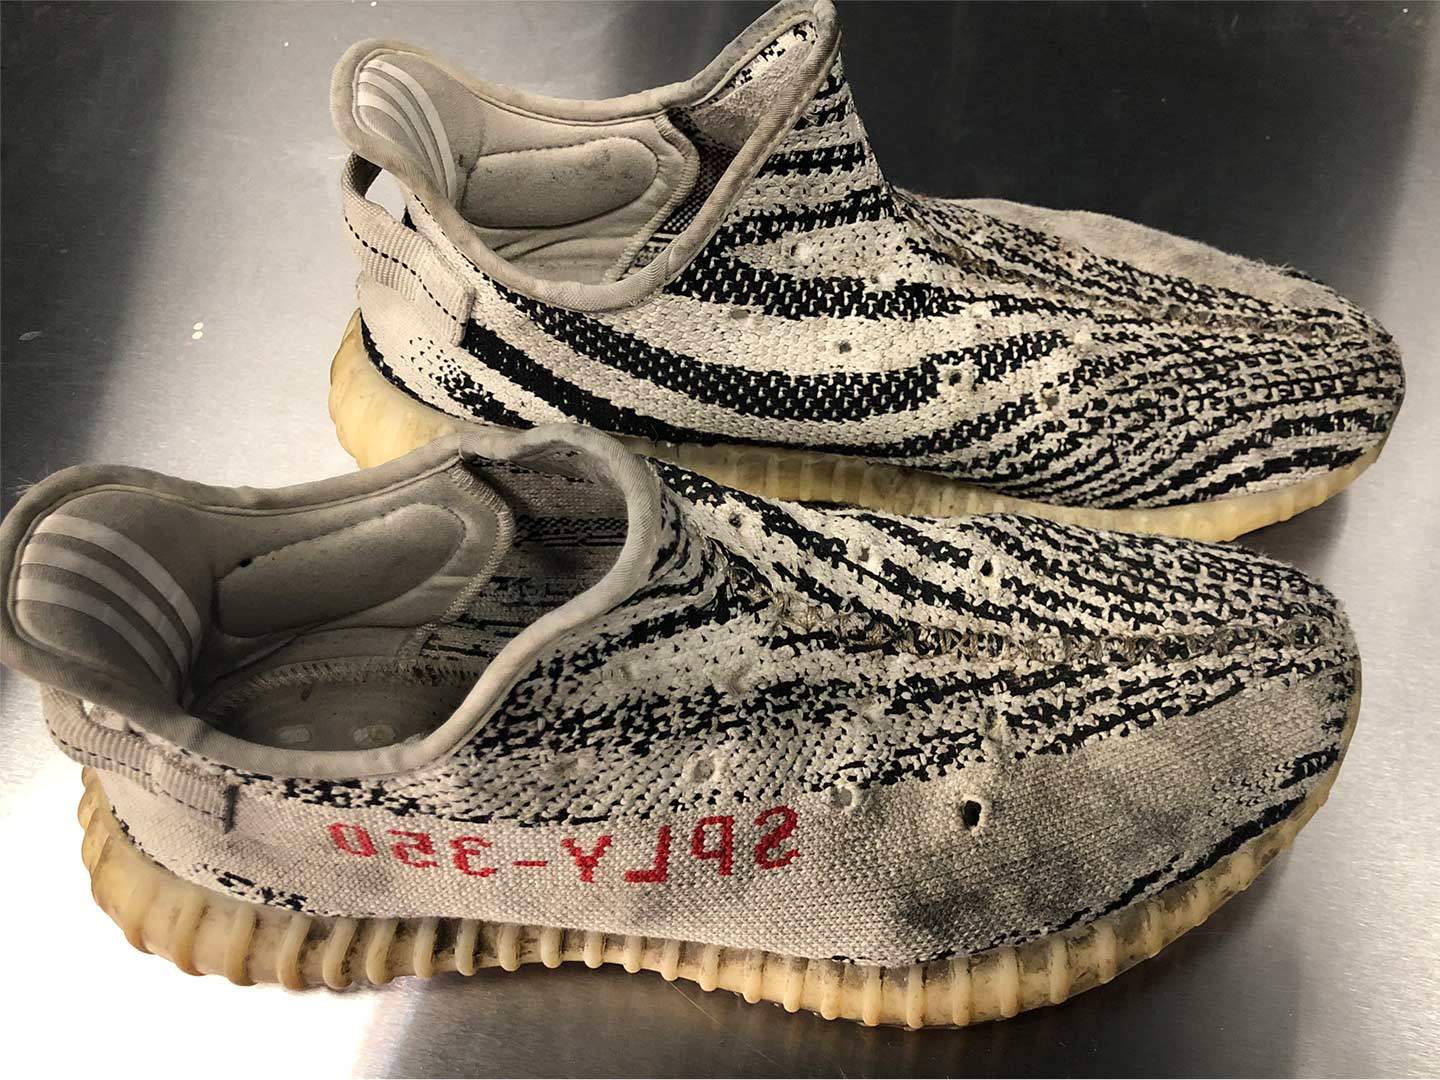 Yeezy 350 Zebra Before And After Cleaning Dope Street Shoes Right Featured